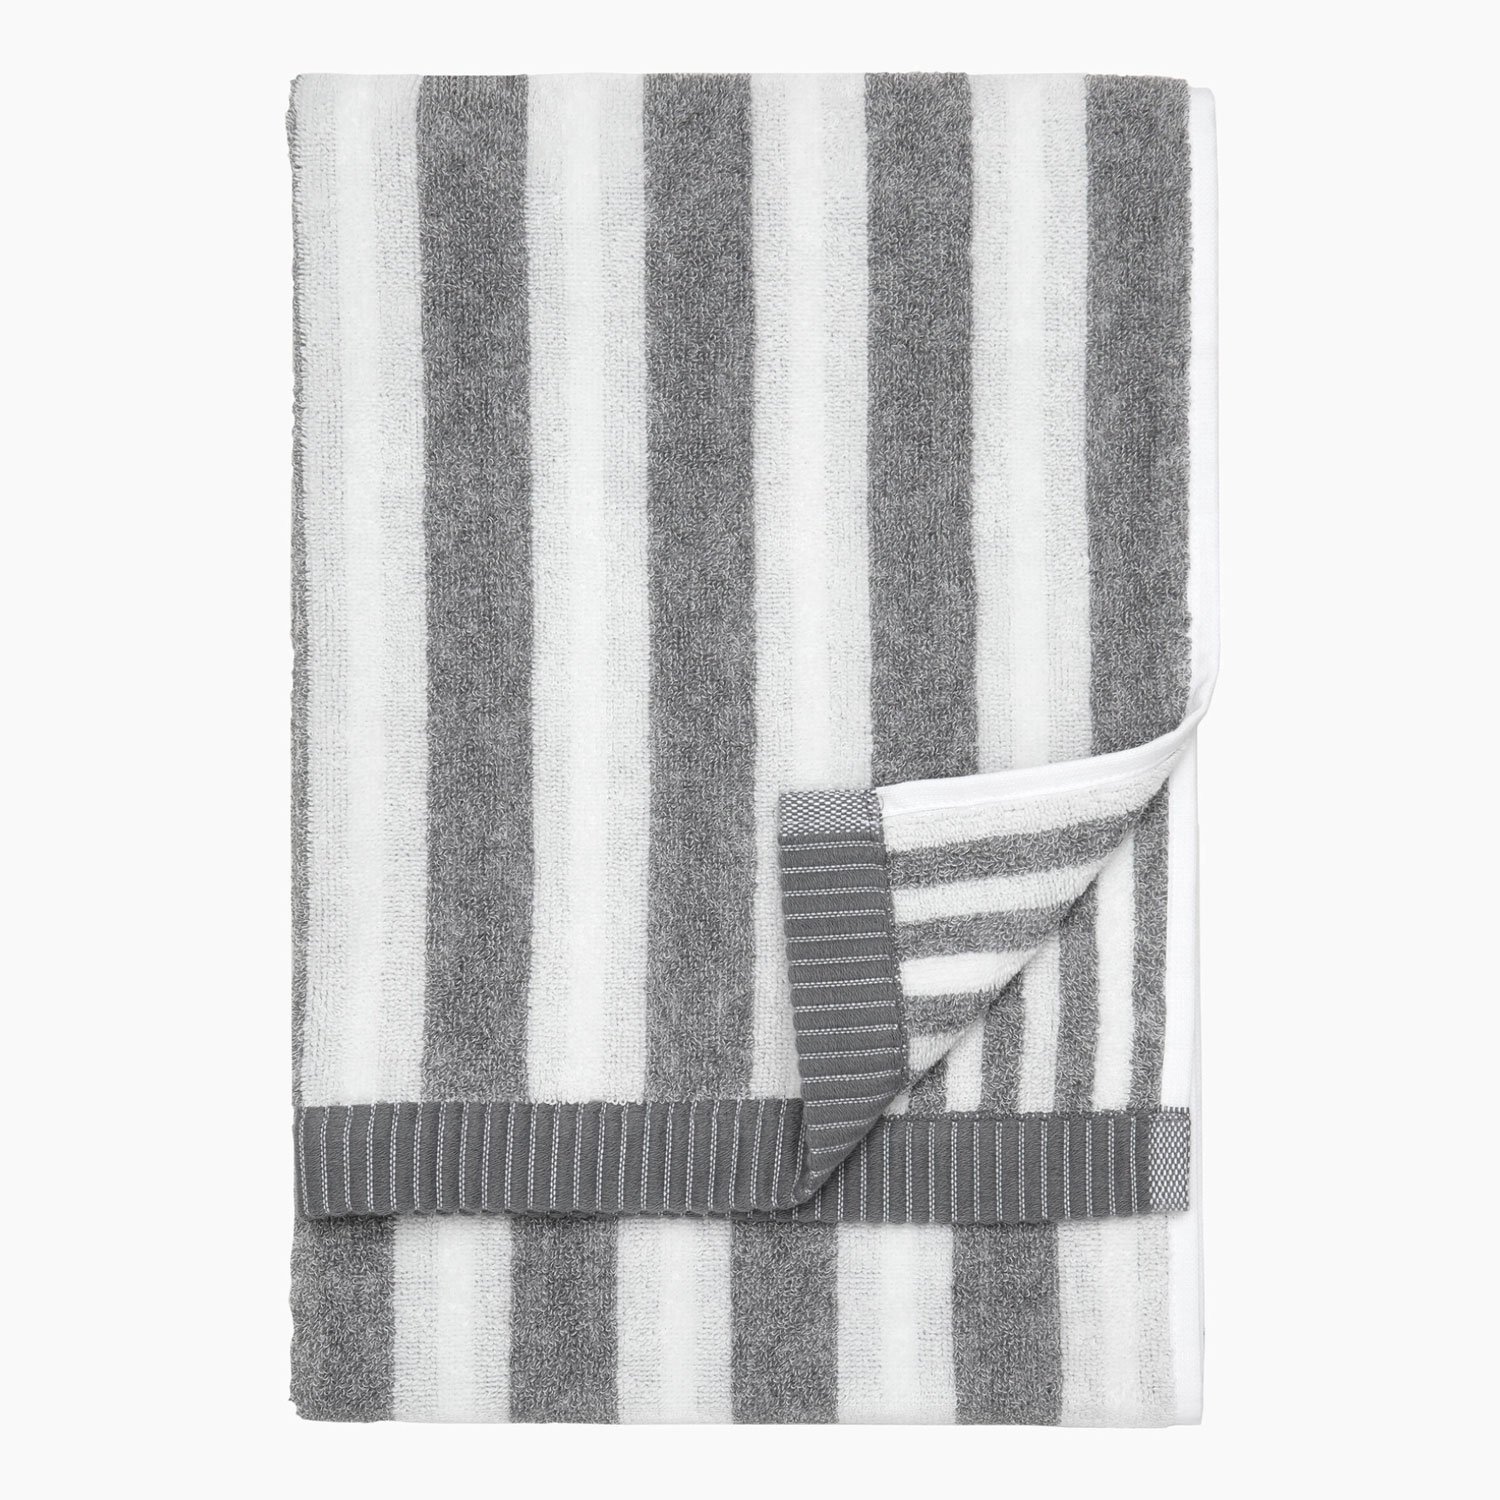 Black Striped Bath Towel, Black and White Striped Black Towels for